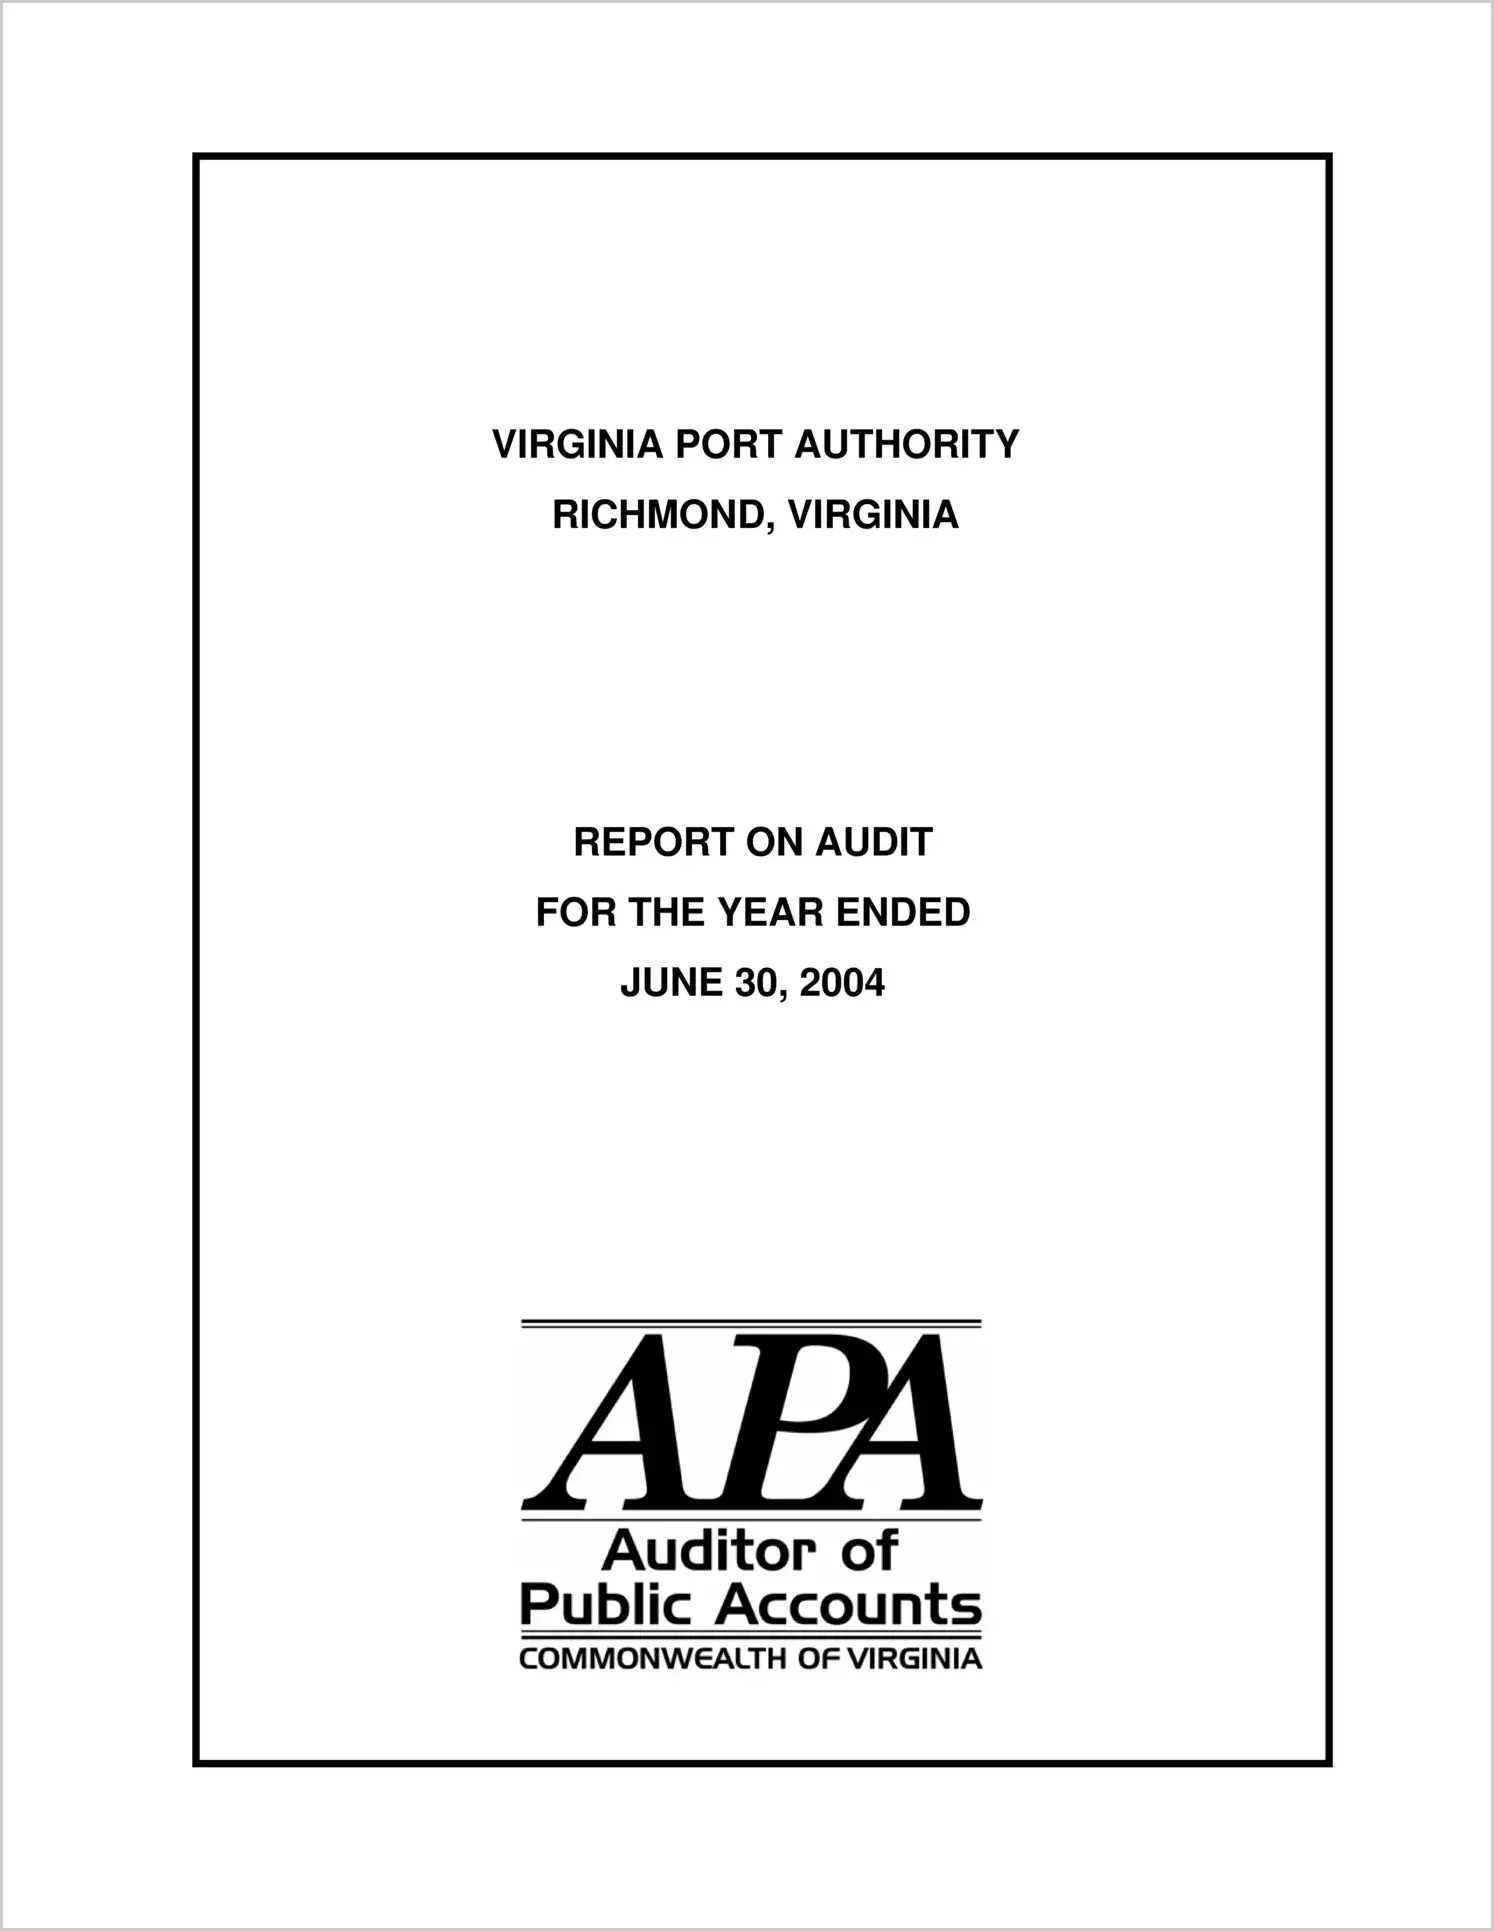 Virginia Port Authority for the year ended June 30, 2004